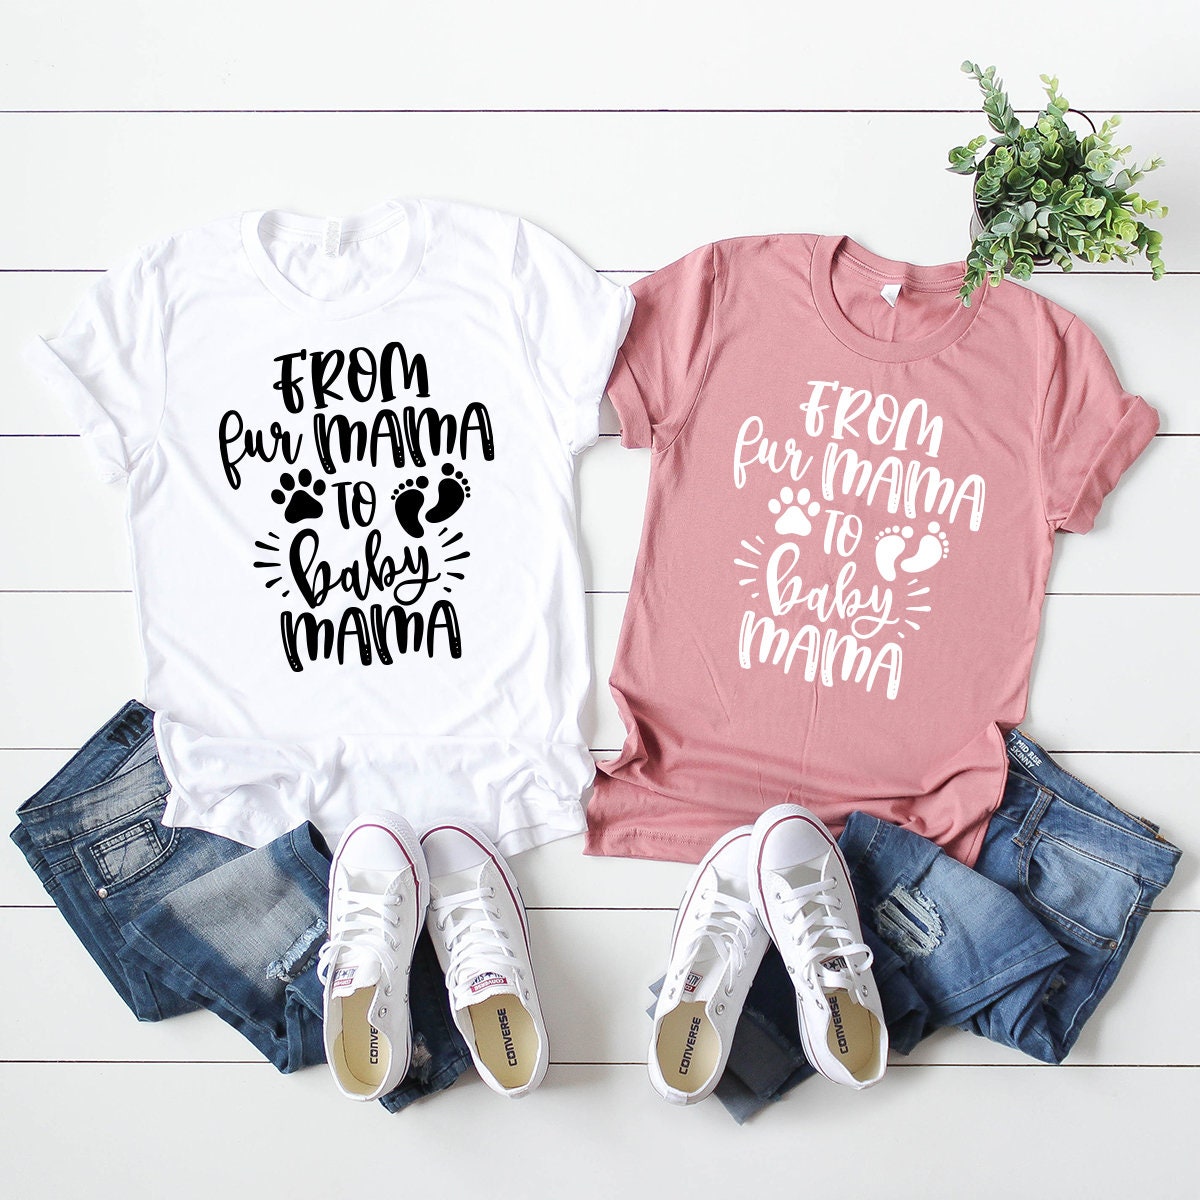 New Mom T-Shirt, First Mothers Day T-Shirt, Pregnant Gift, Maternity Shirt - Fastdeliverytees.com